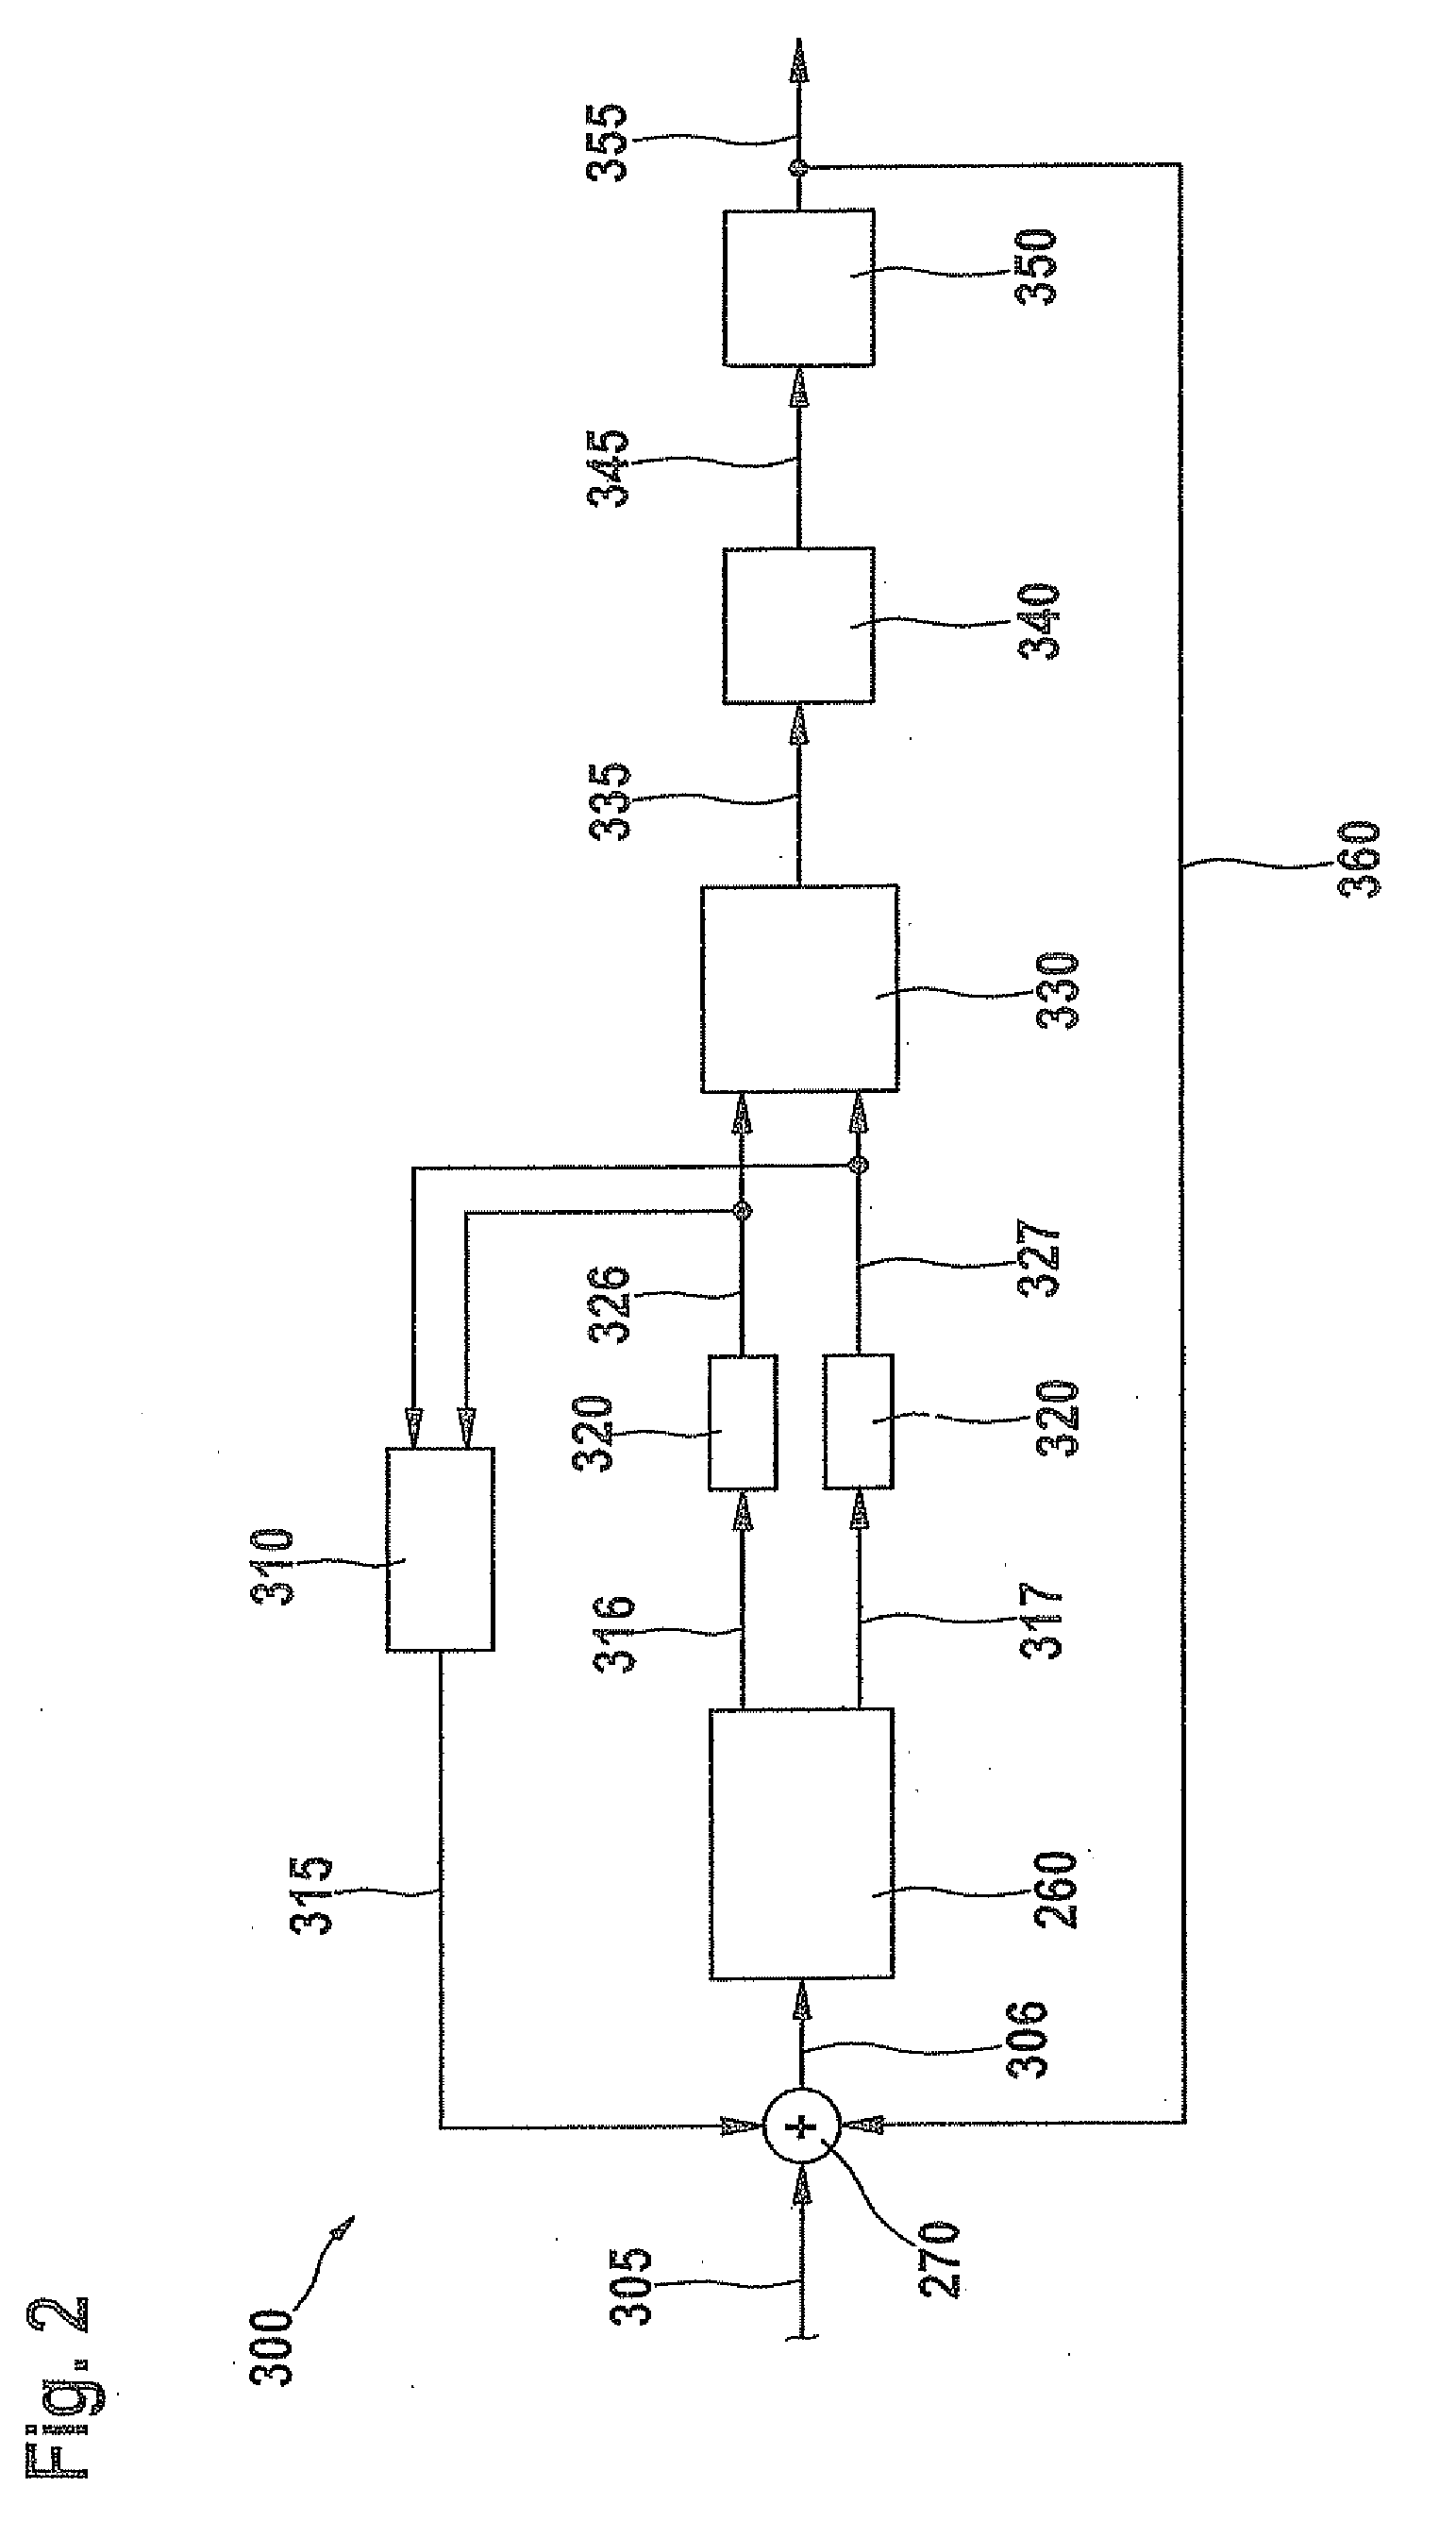 Evaluation electronics system for a rotation-rate sensor